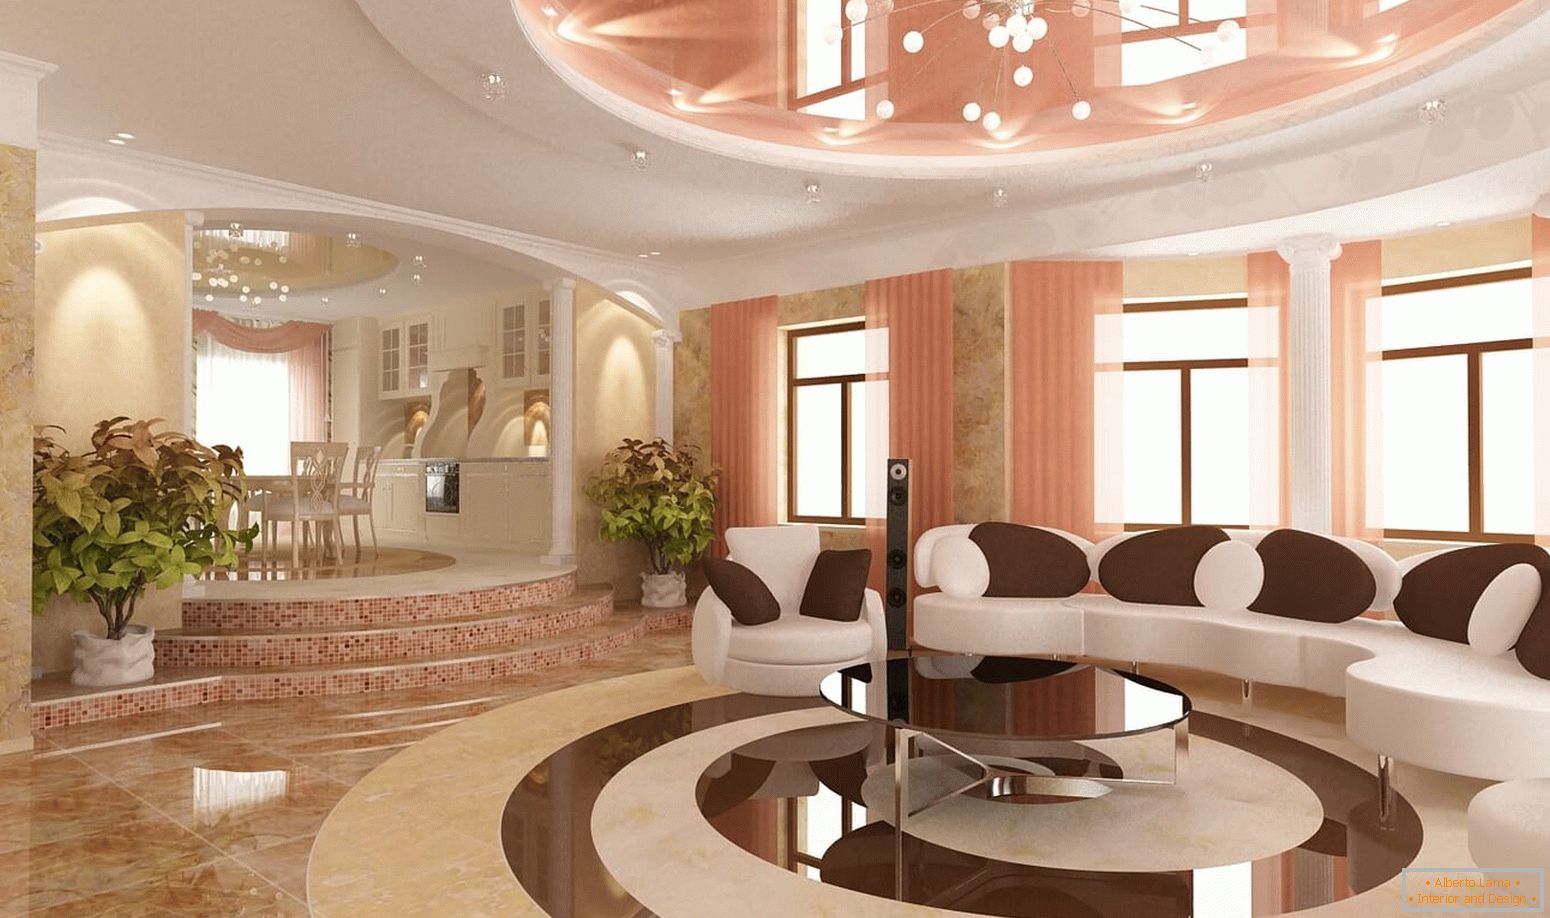 The combination of peach and white in the design of the ceiling